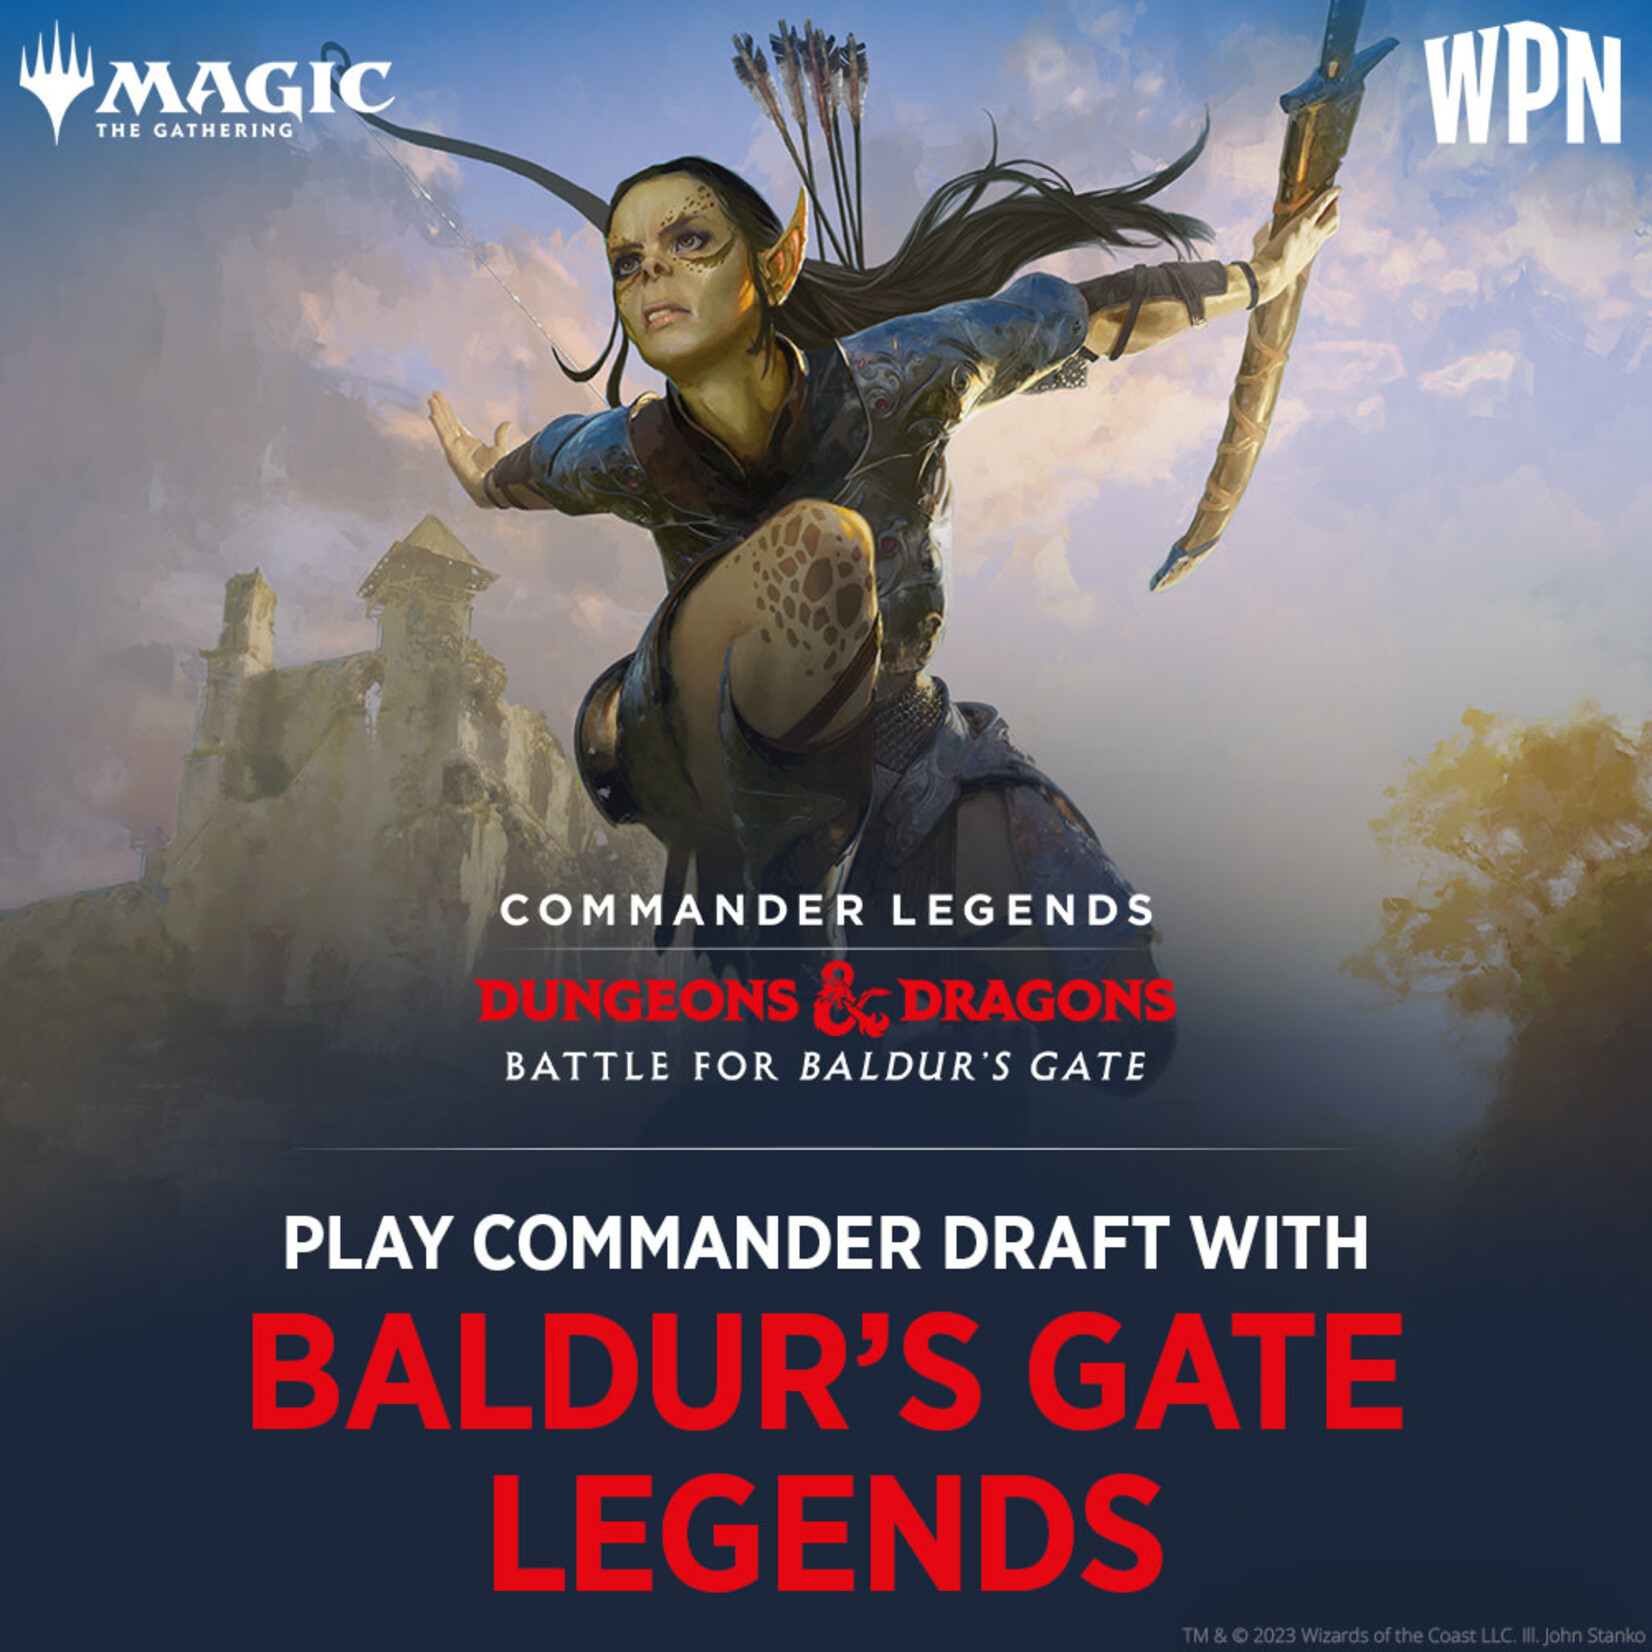 Fair Game Admission: Battle for Baldur's Gate - 50th Anniversary Edition Draft Event (May 17, 6:00 PM, Downers Grove)